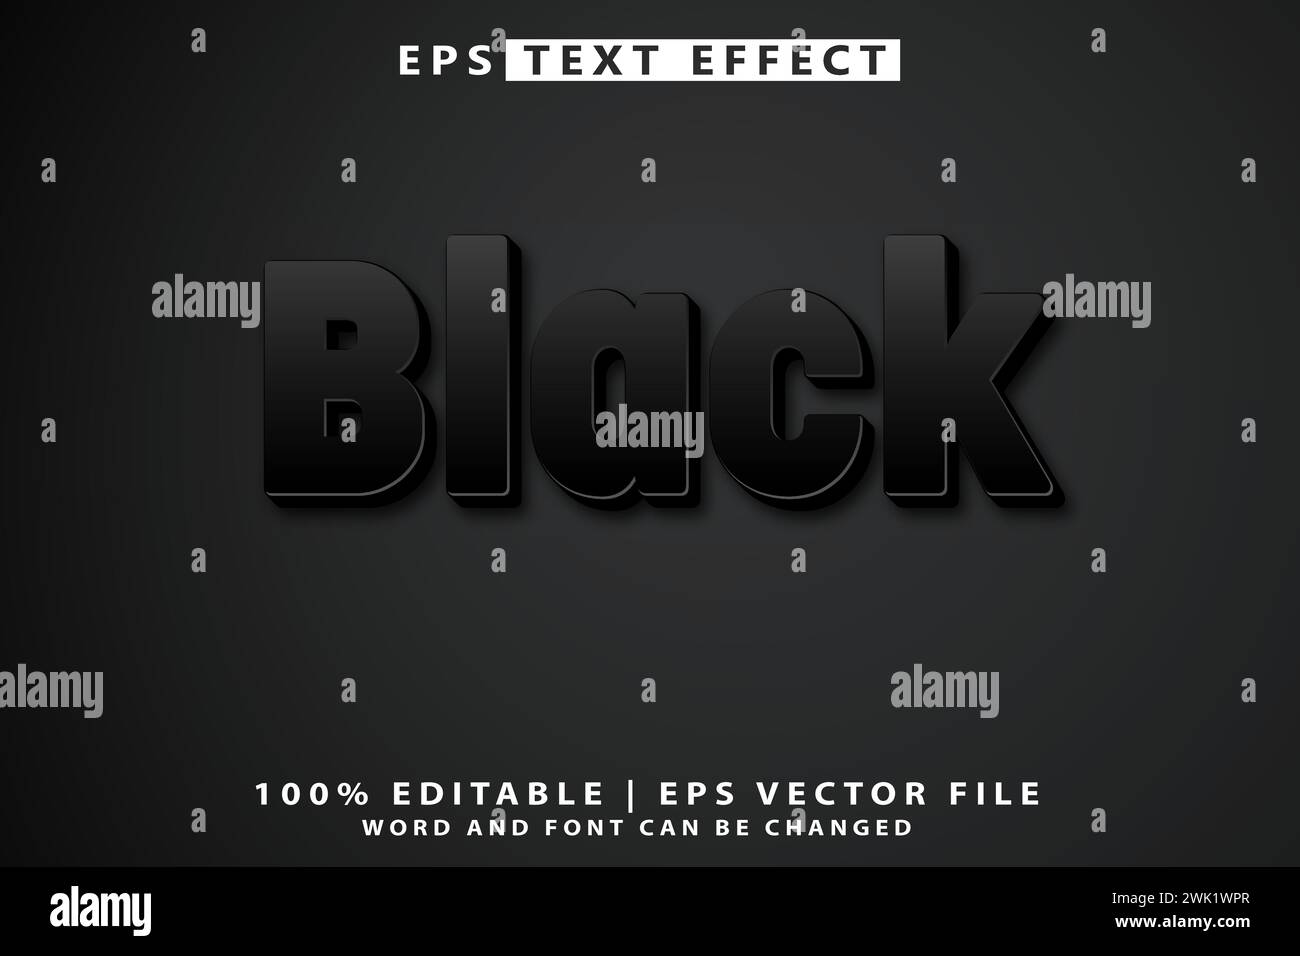 Editable text in Black on a posh black background Stock Vector